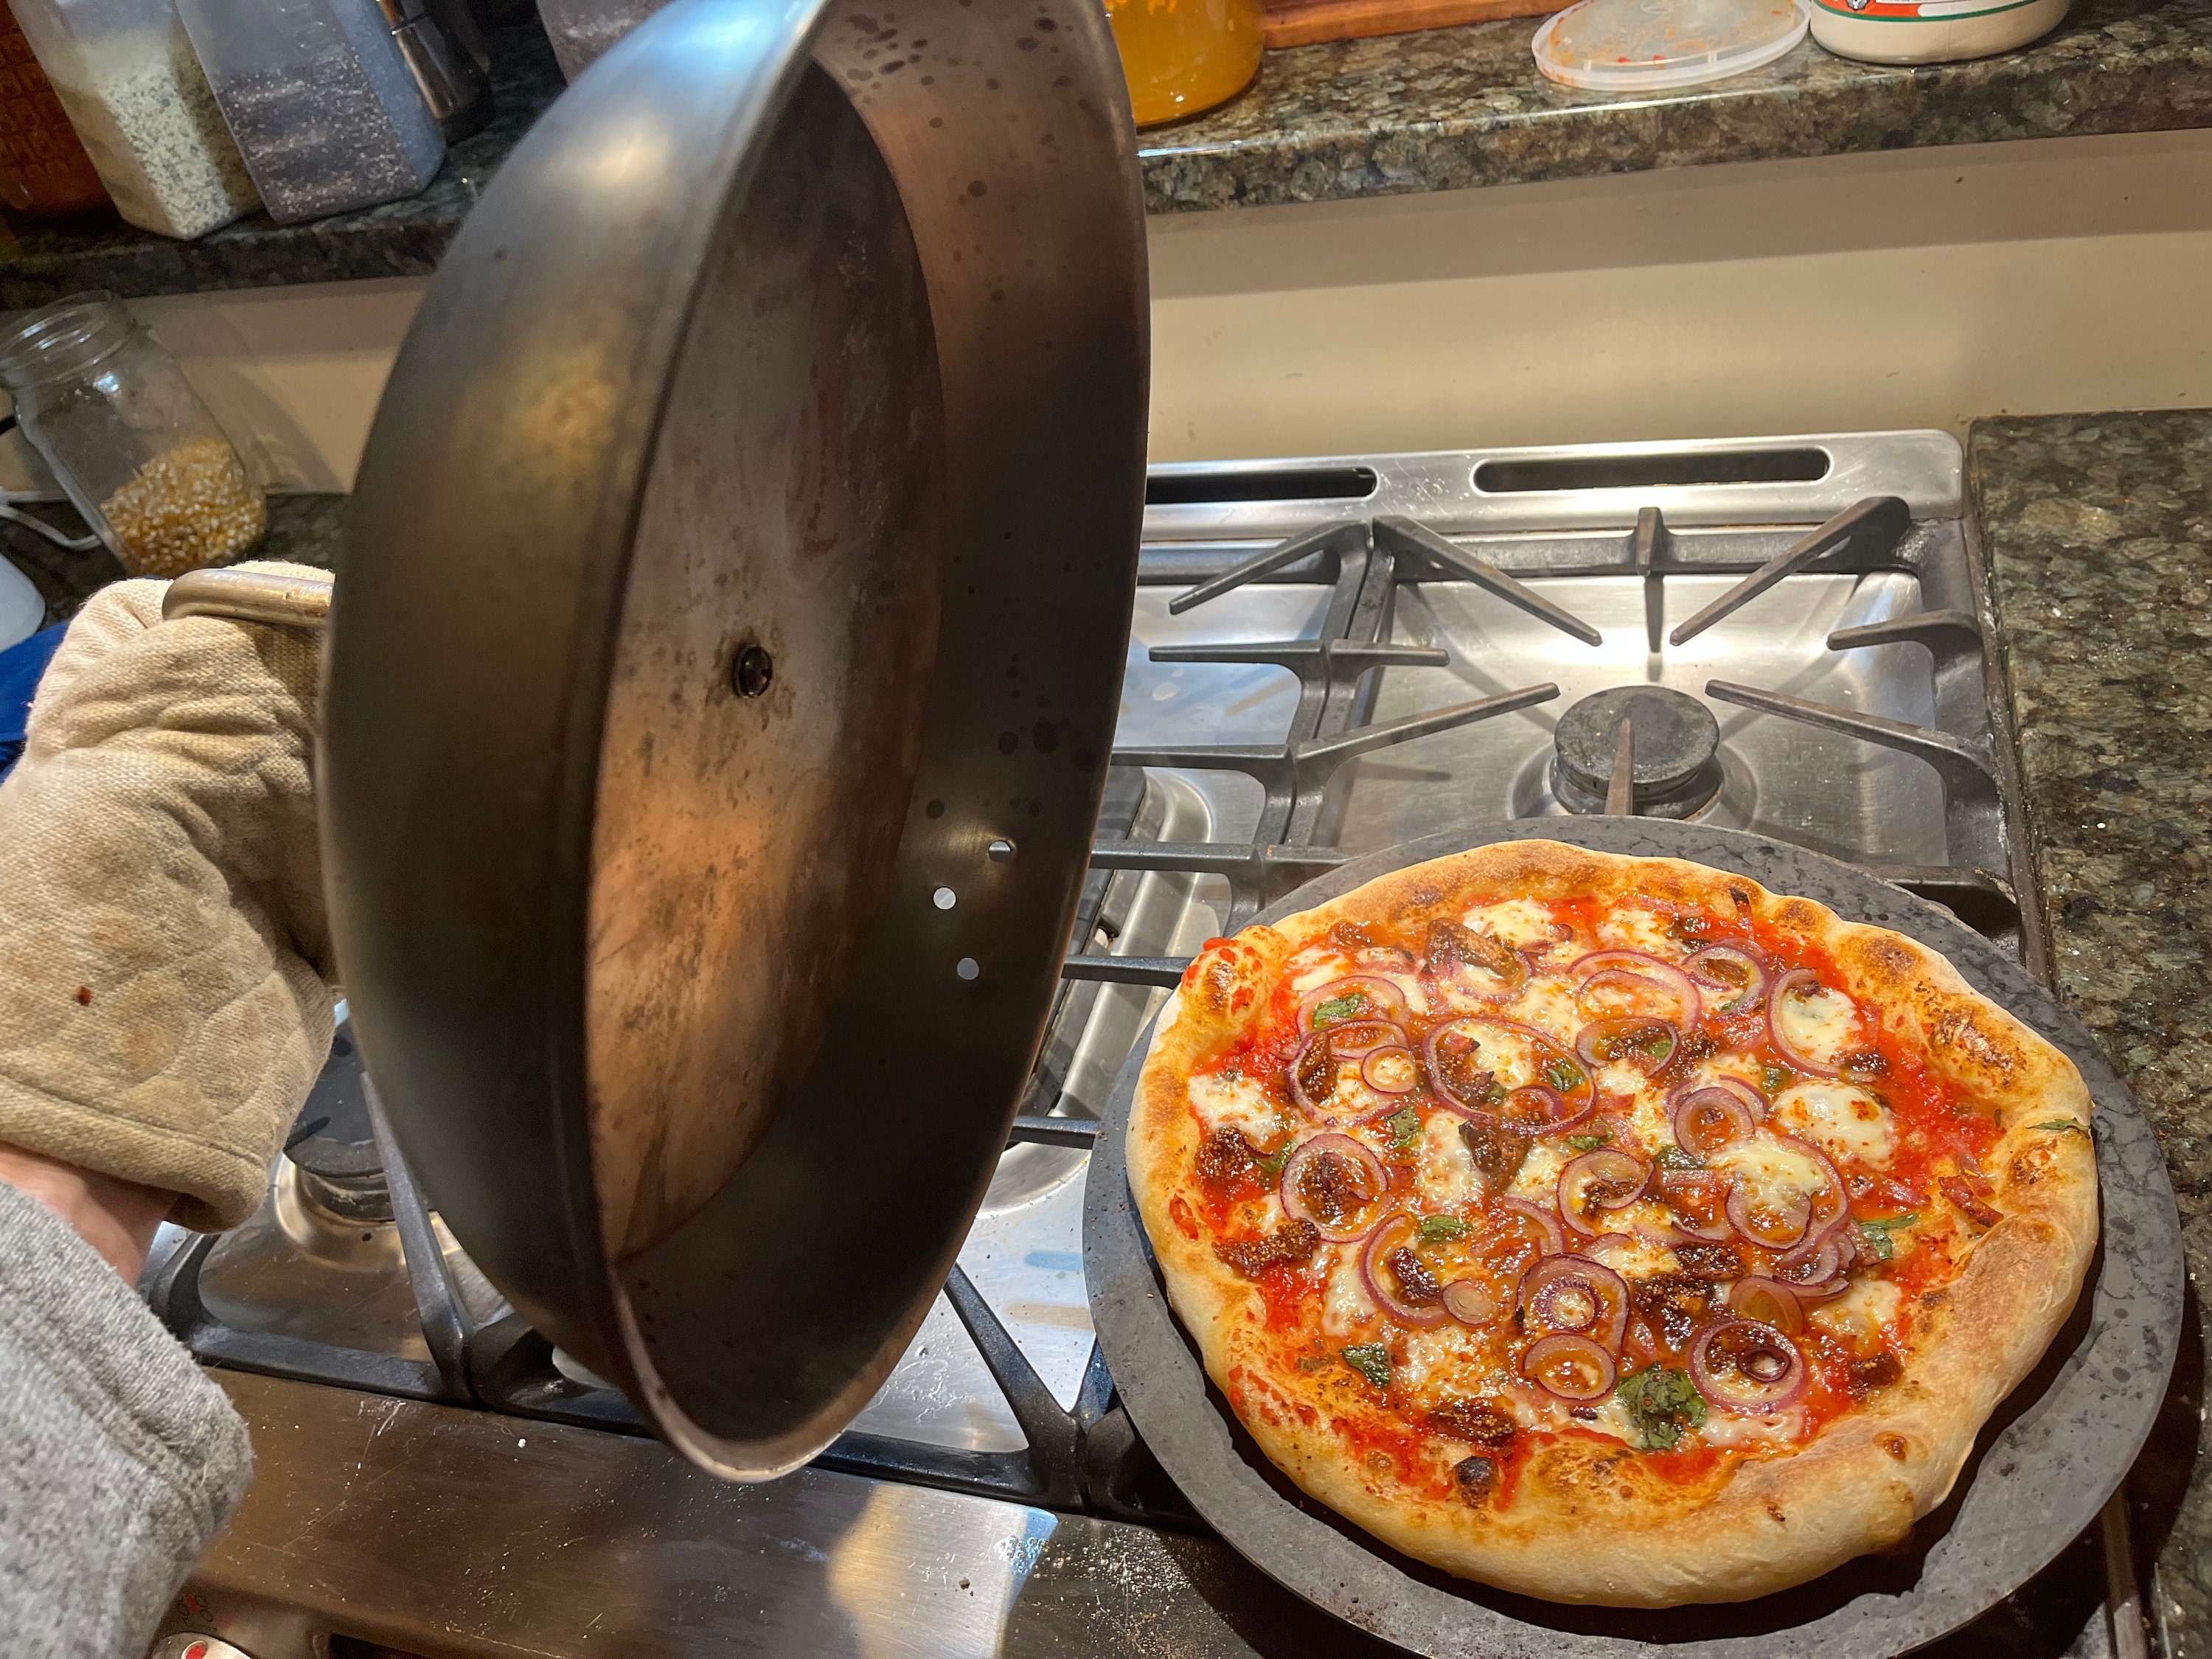 Best Portable Pizza Oven? - Lodge's Cast Iron Cook It All 